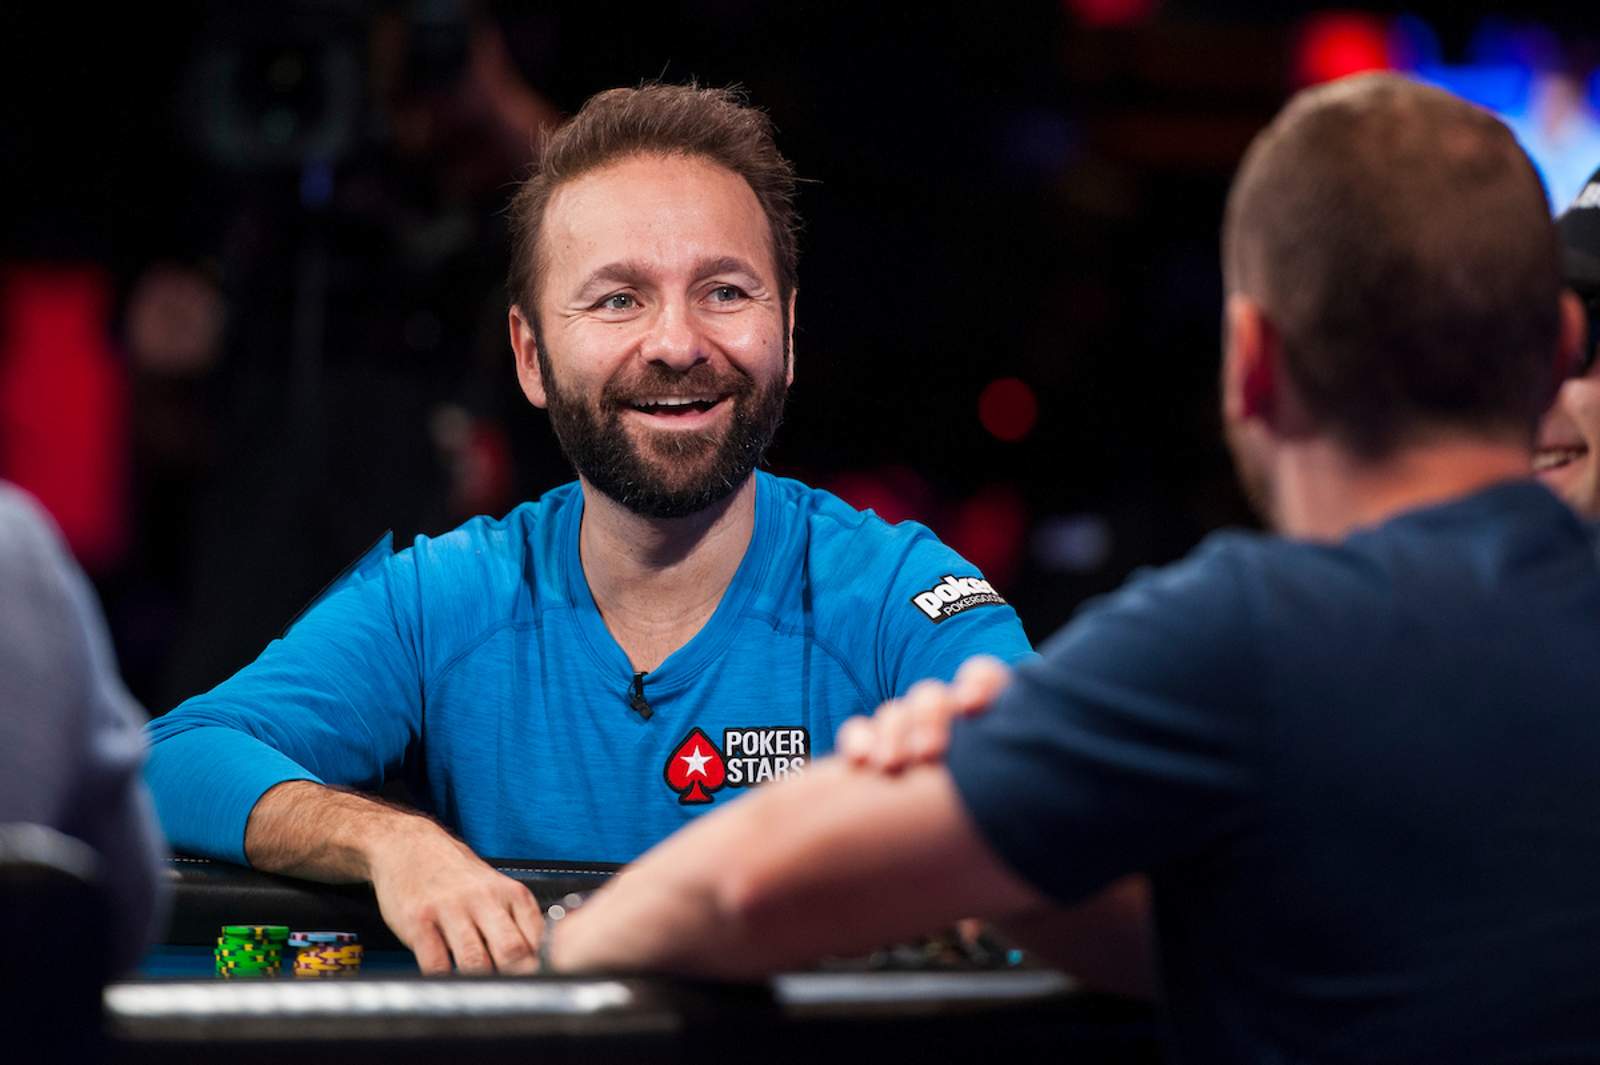 Daniel Negreanu: "This Was My Best World Series of Poker By Far"